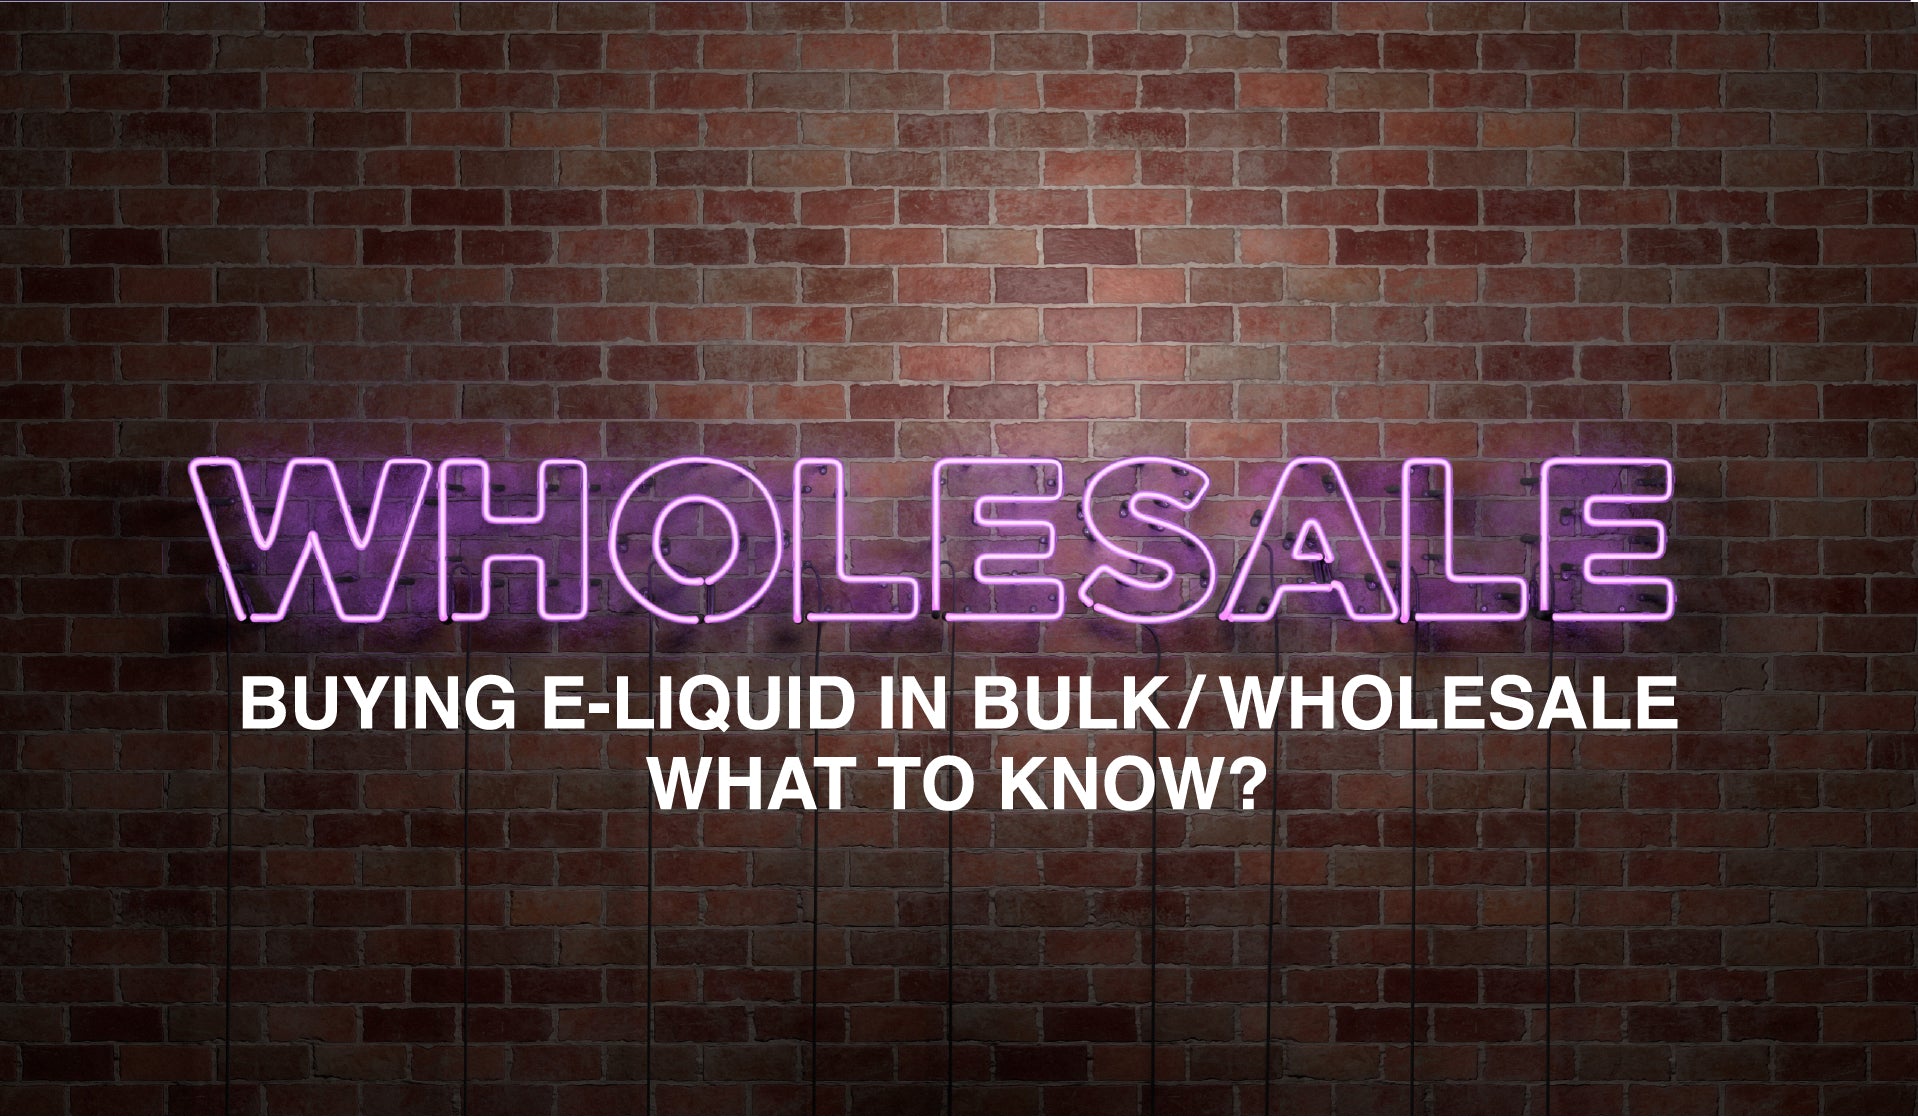 What to Know When Buying E-Liquid in Bulk?